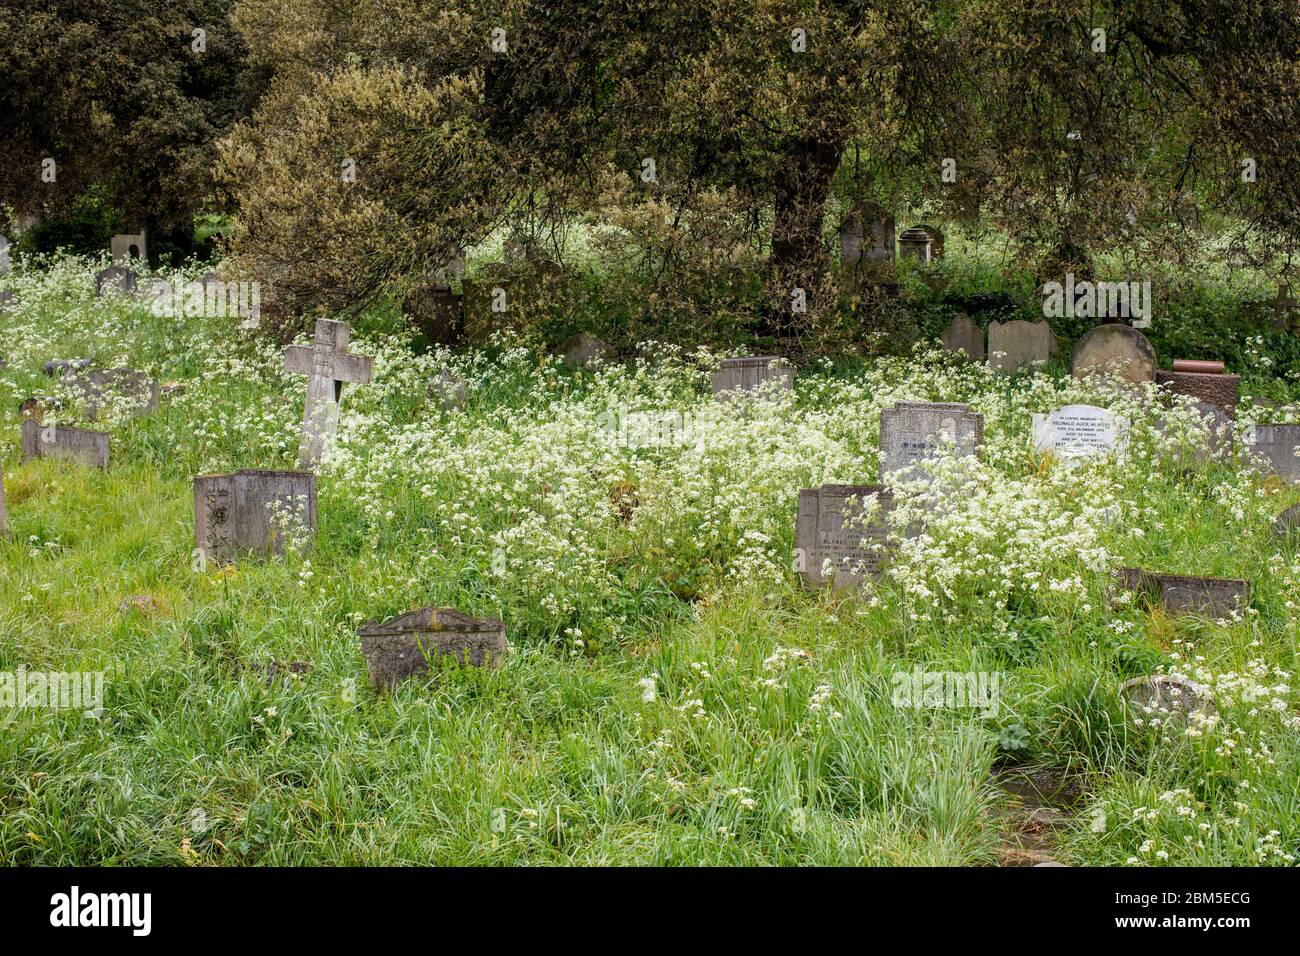 Gravestones in Brompton Cemetery, Kensington, London; one of the 'Magnificent Seven' London cemeteries, built in 1840. Stock Photo